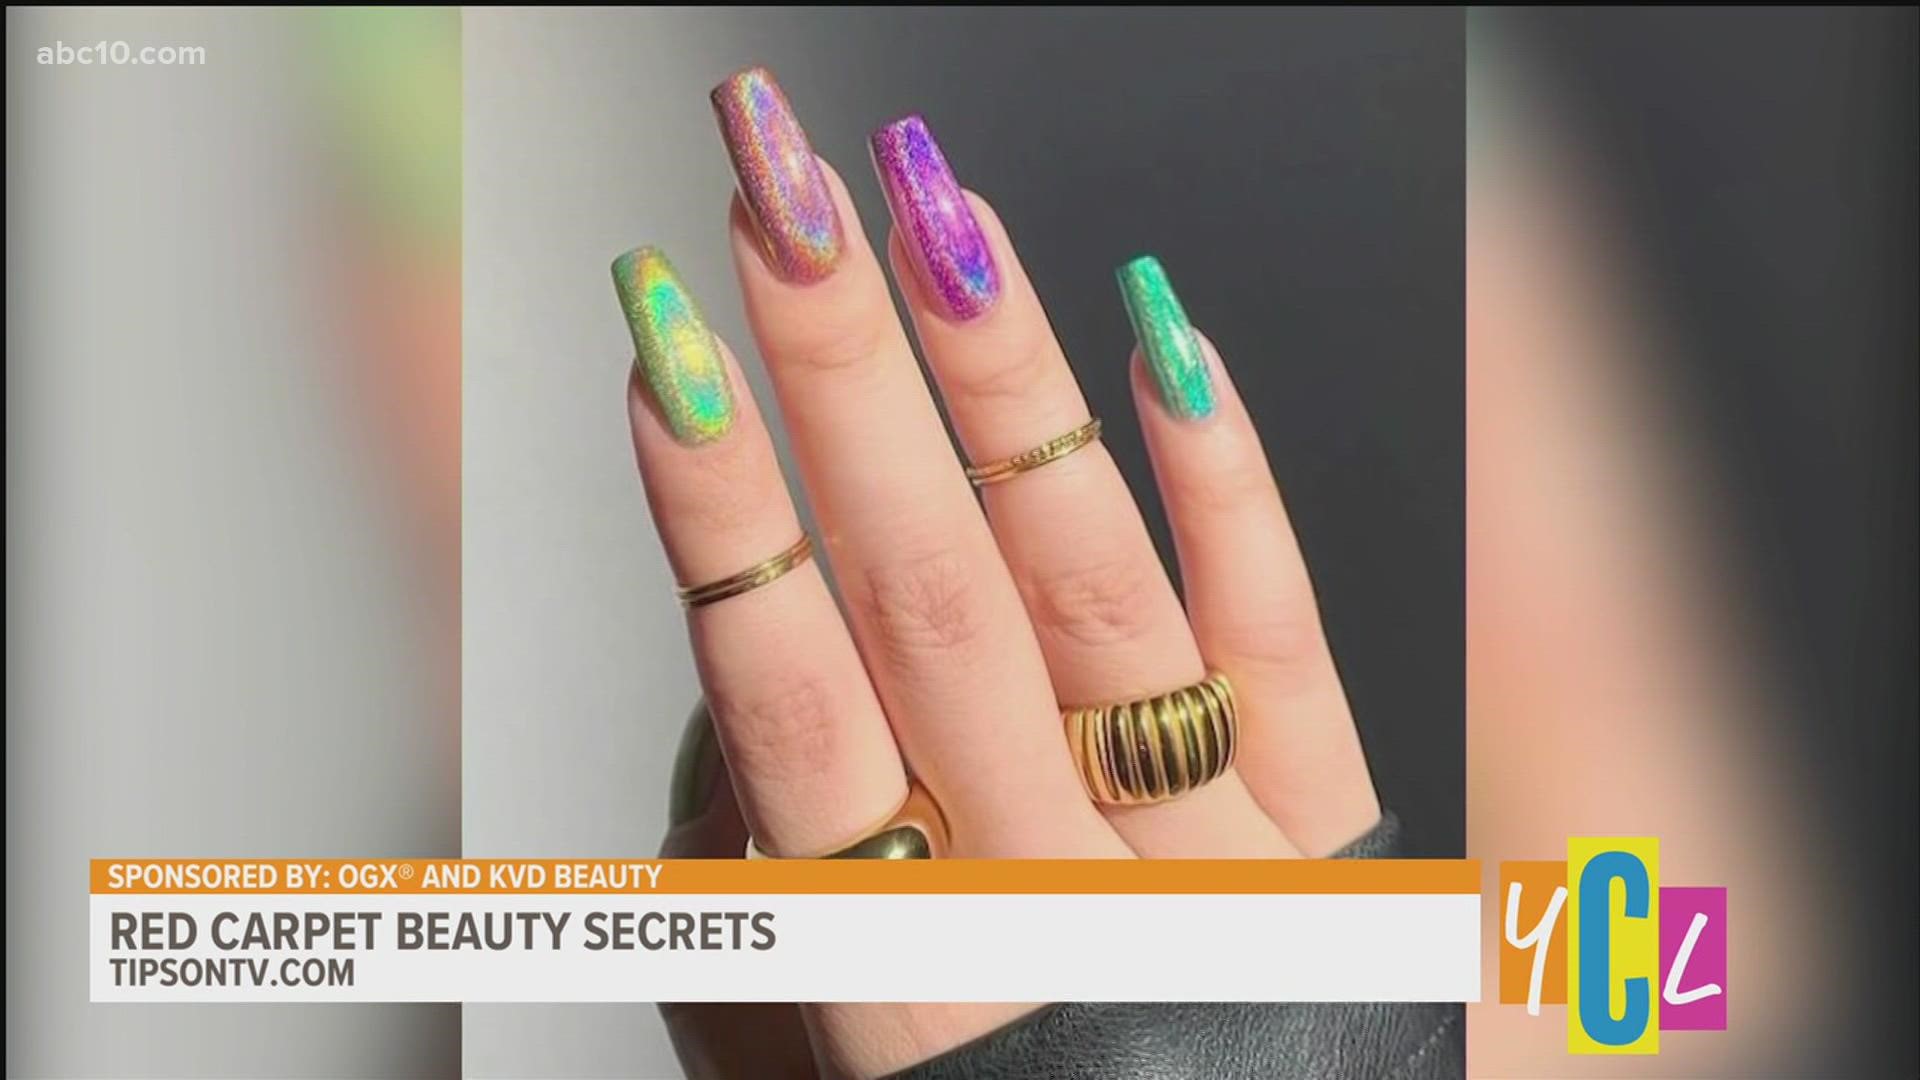 A former Rockette and celebrity stylist shares timely tips for celebrity glam on a budget. This segment paid for by OGX® and KVD Beauty.